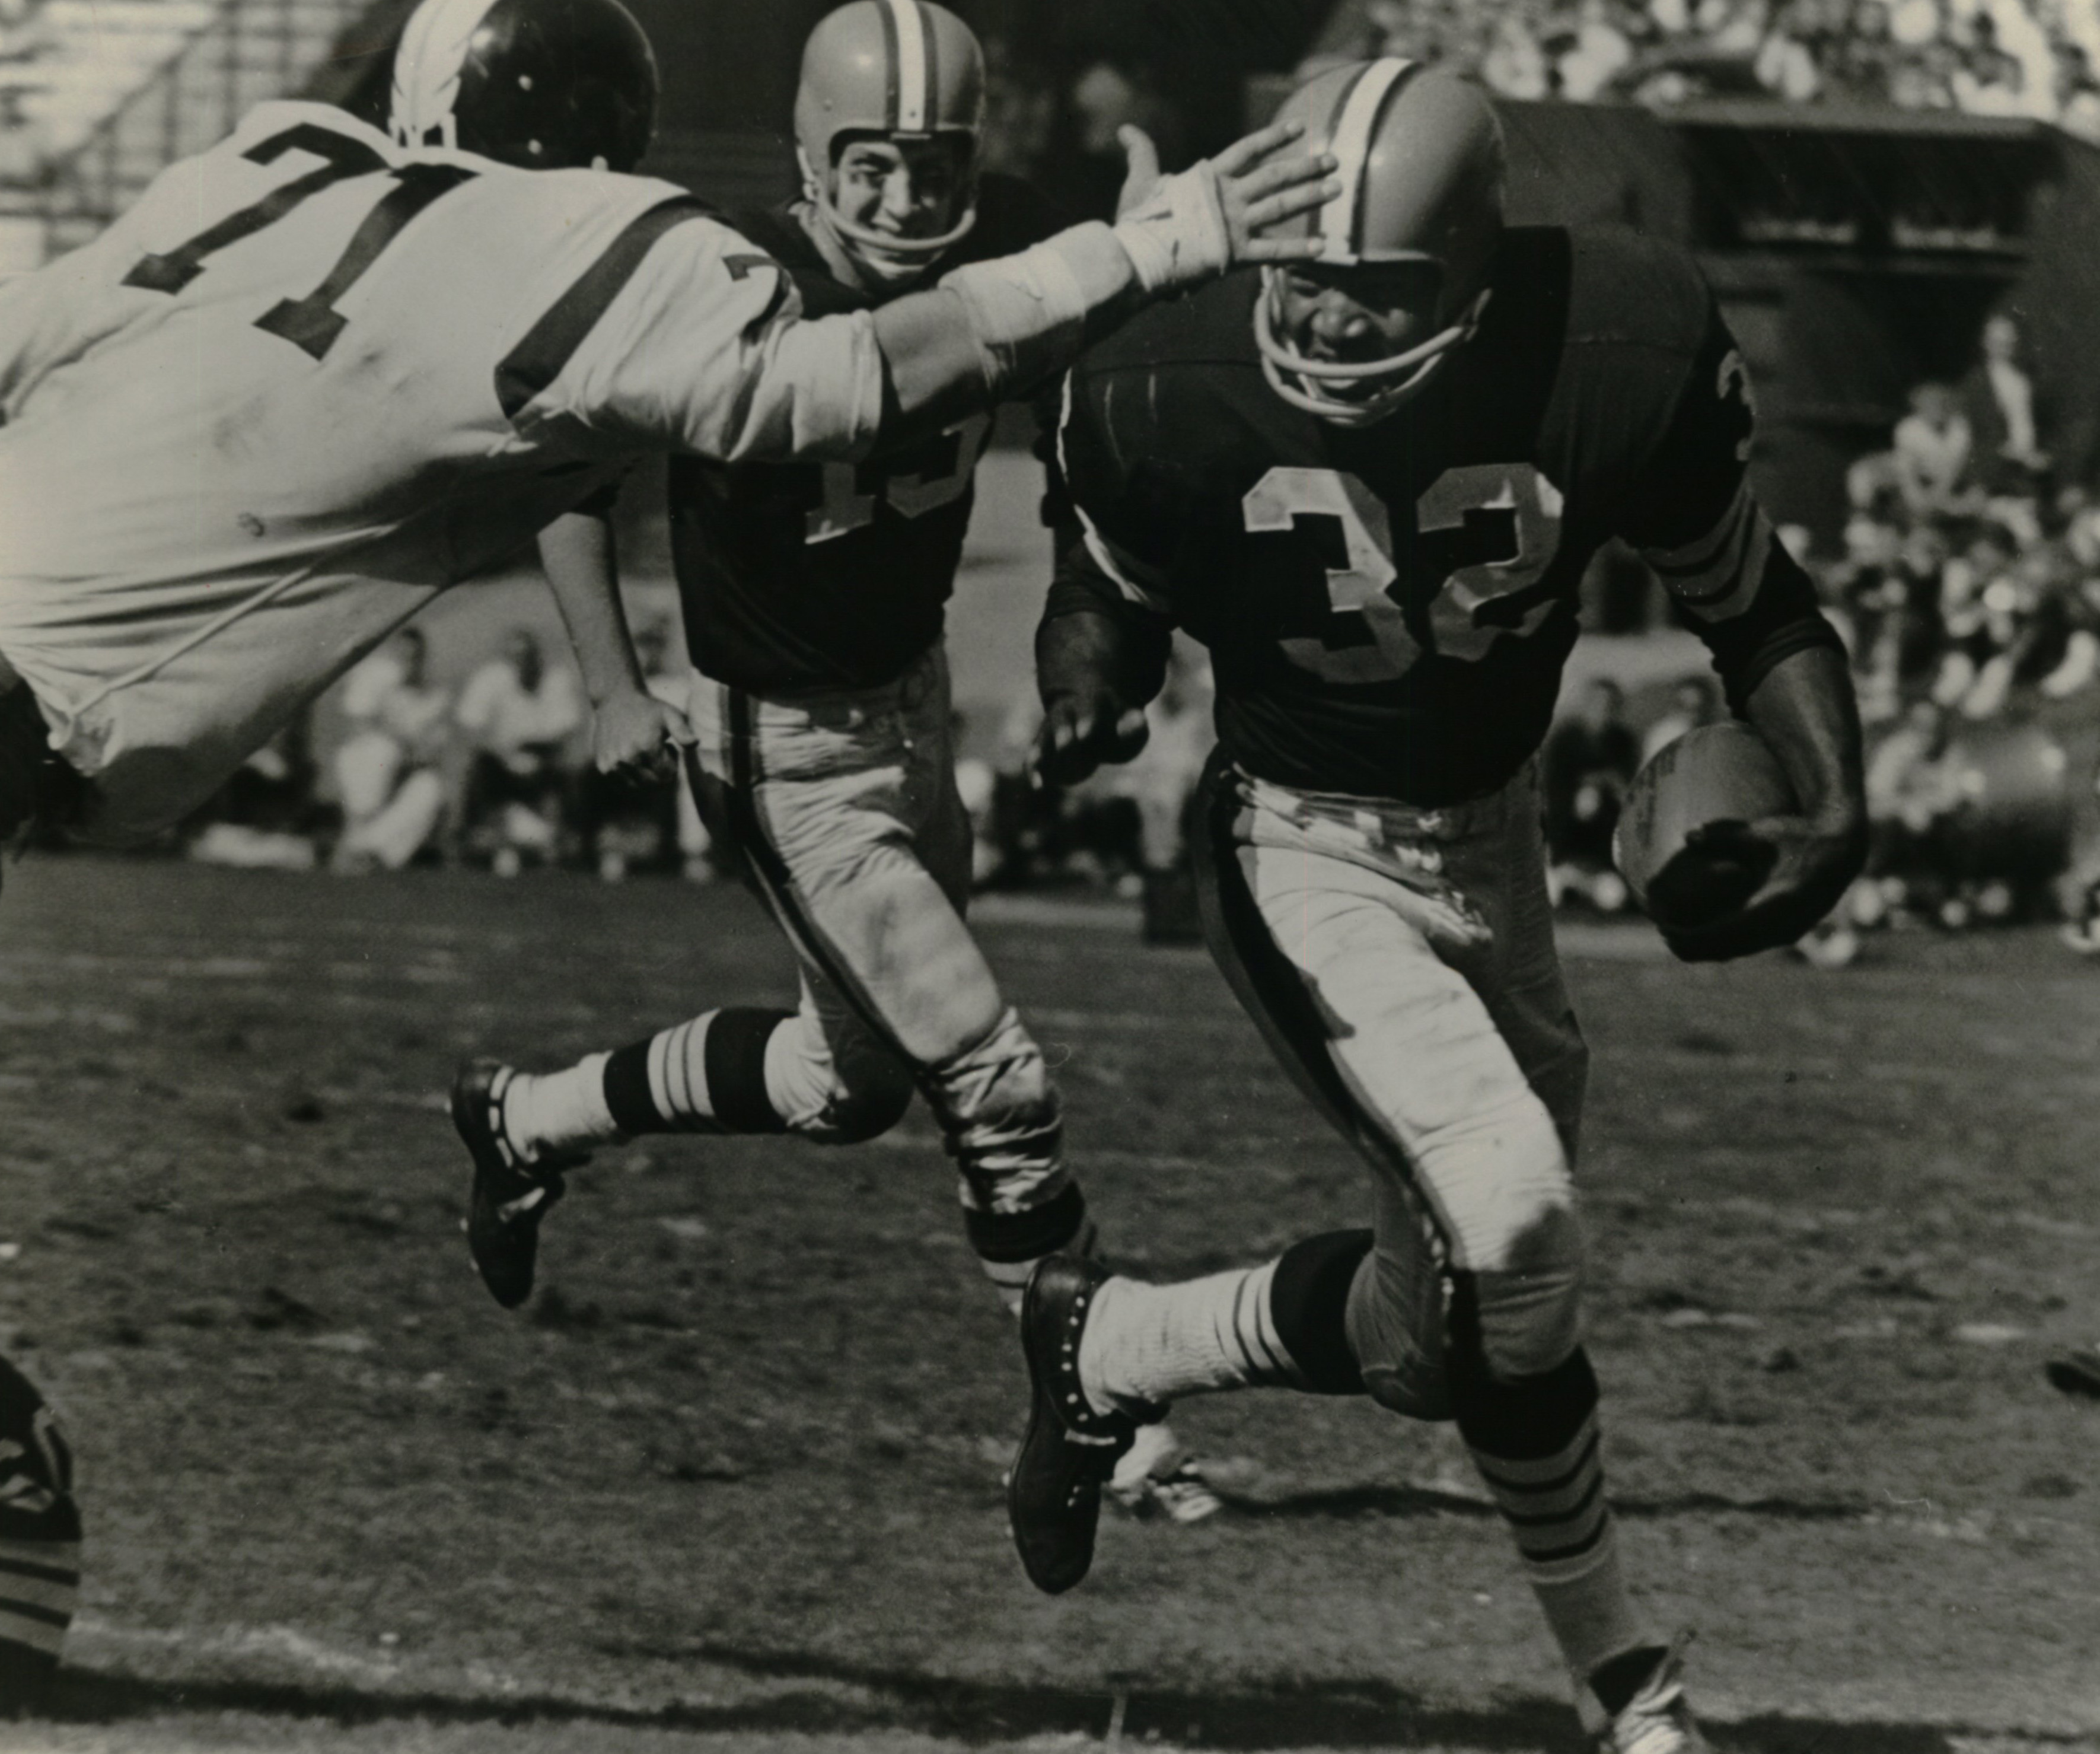 1963 against the Washington Redskins.  Quarterback Frank Ryan smiles as No. 71 of the Redskins is about to get stiff-armed.  Play resulted in first down.  Malcolm W. Emmons.  Jim Brown - Emmons  vs. Washignton, 13 - Frank Ryan.